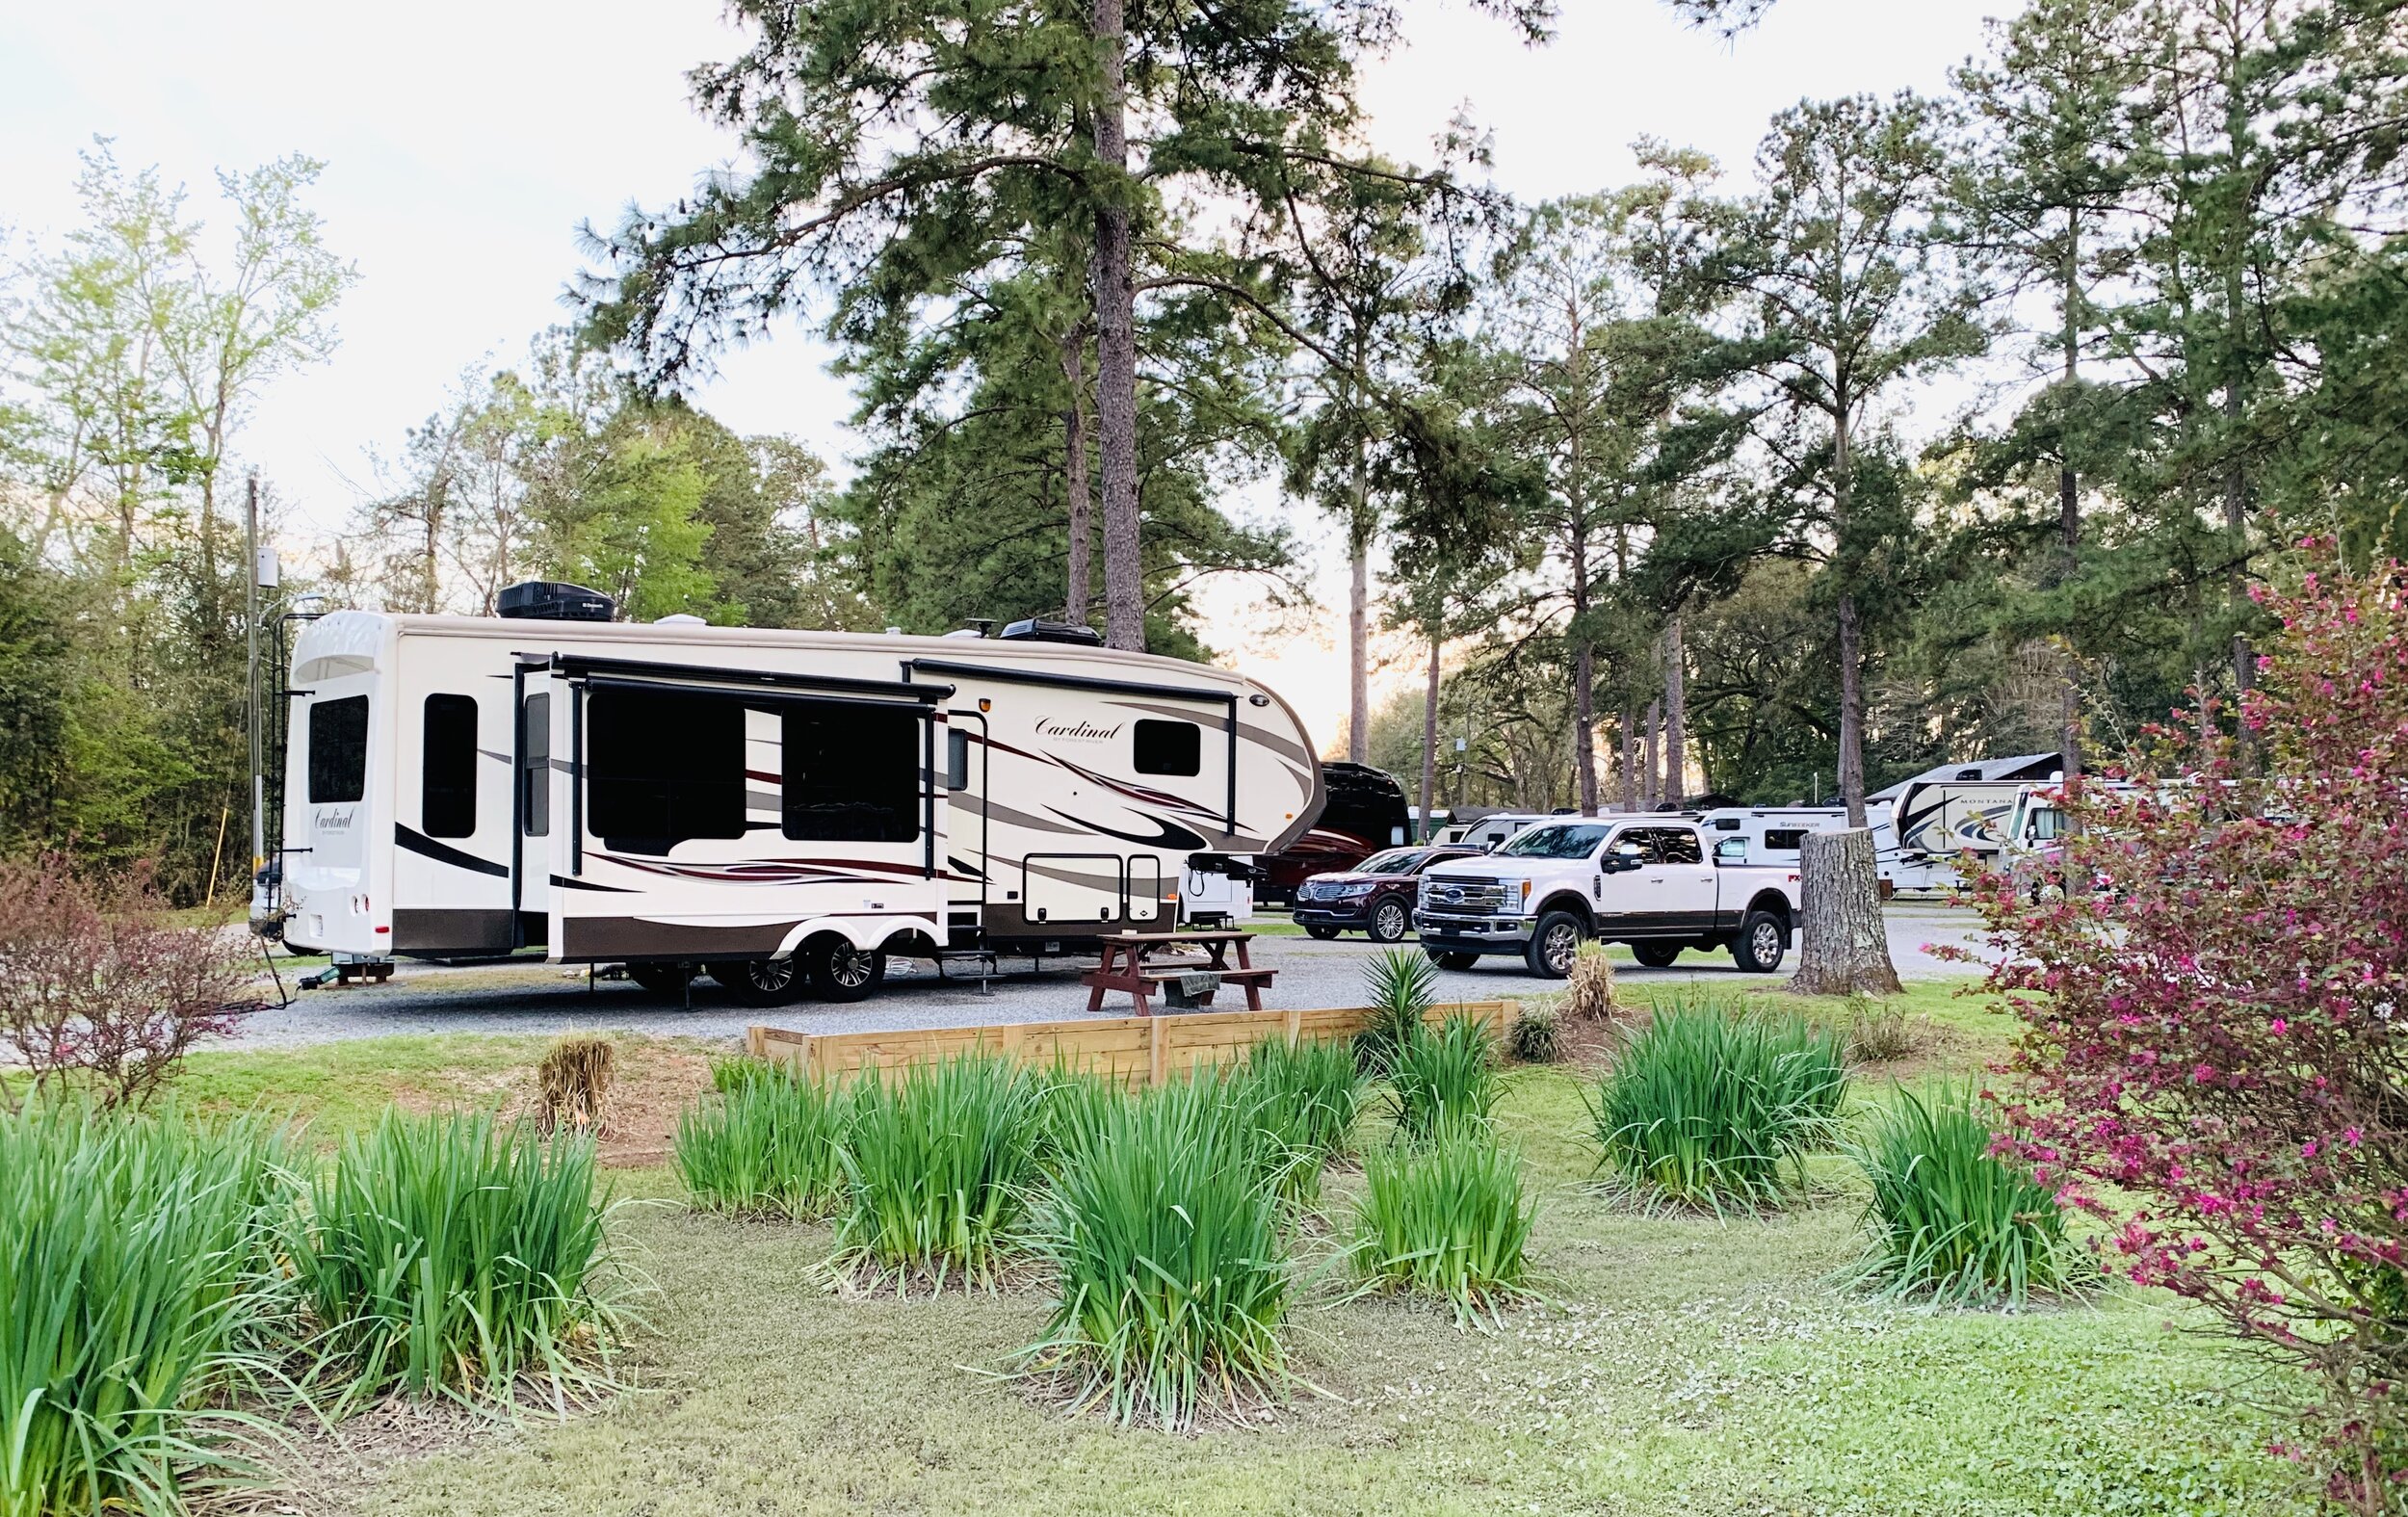  Many of our campsites in Florida were very cramped due to the Snowbird season. We thoroughly enjoyed having more space in this nice quiet Tallahassee park. 